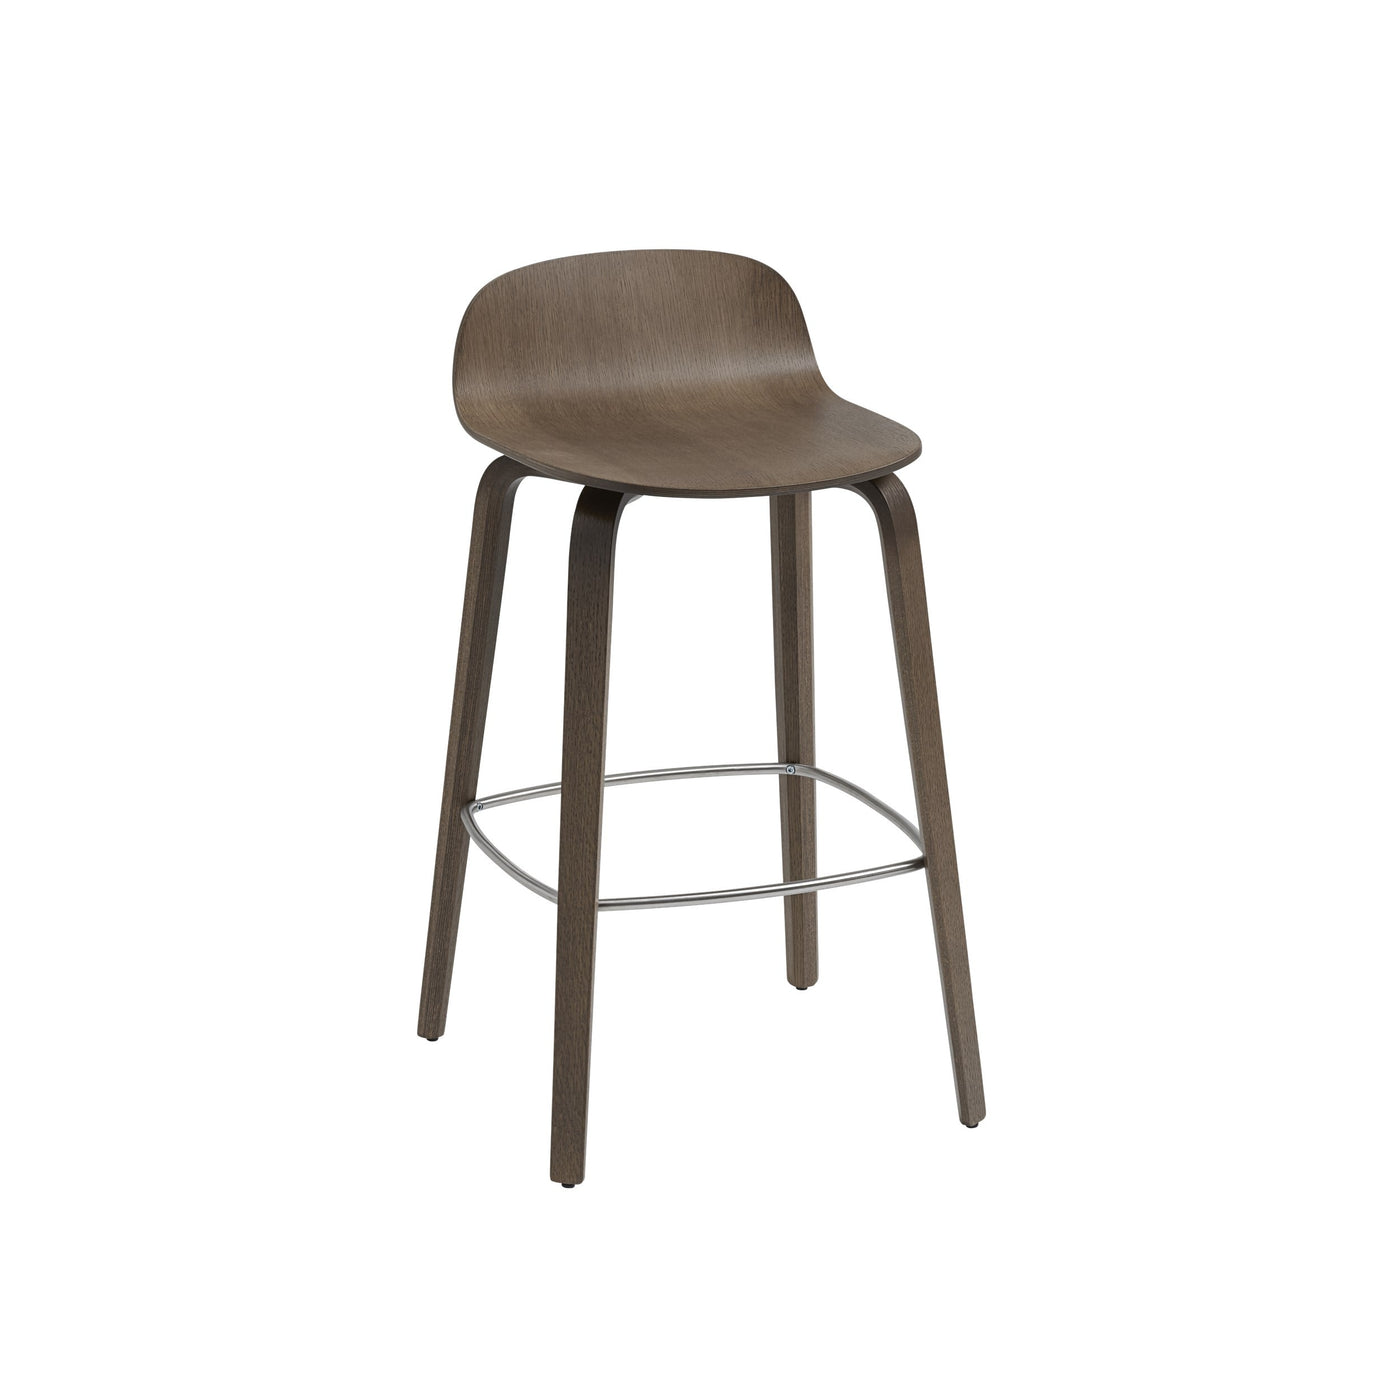 Muuto Visu Counter Stool. Shop online at someday designs. #colour_stained-dark-brown